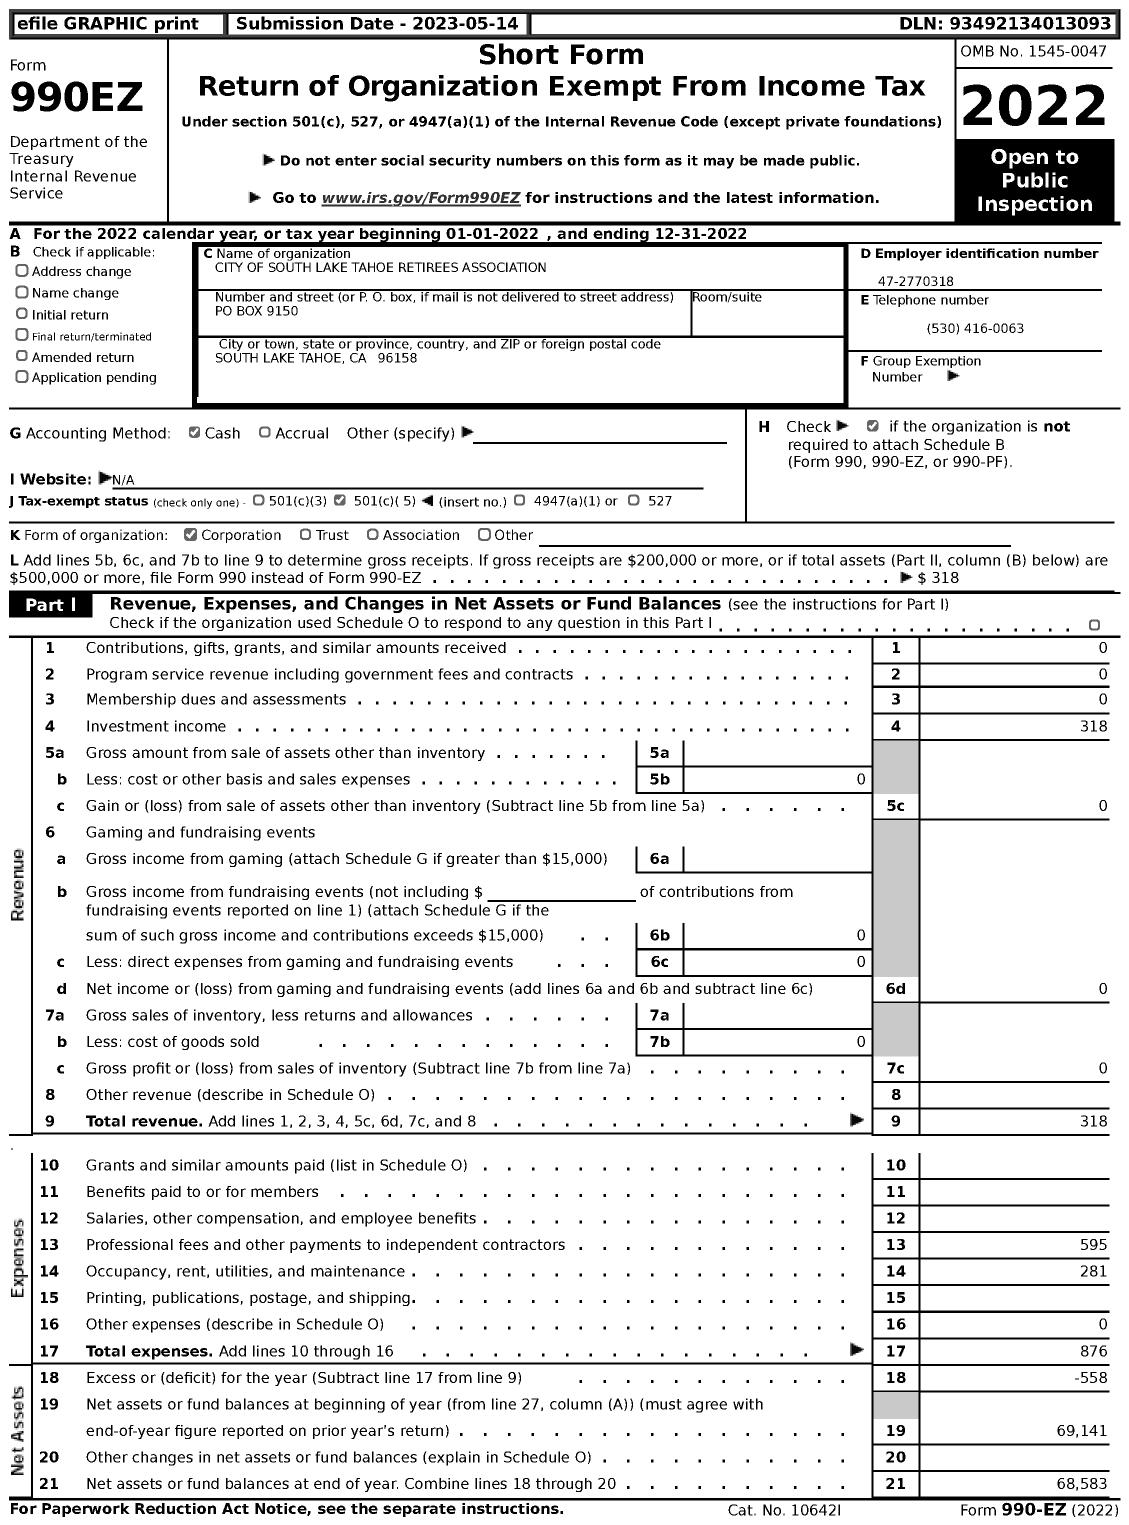 Image of first page of 2022 Form 990EZ for City of South Lake Tahoe Retirees Association